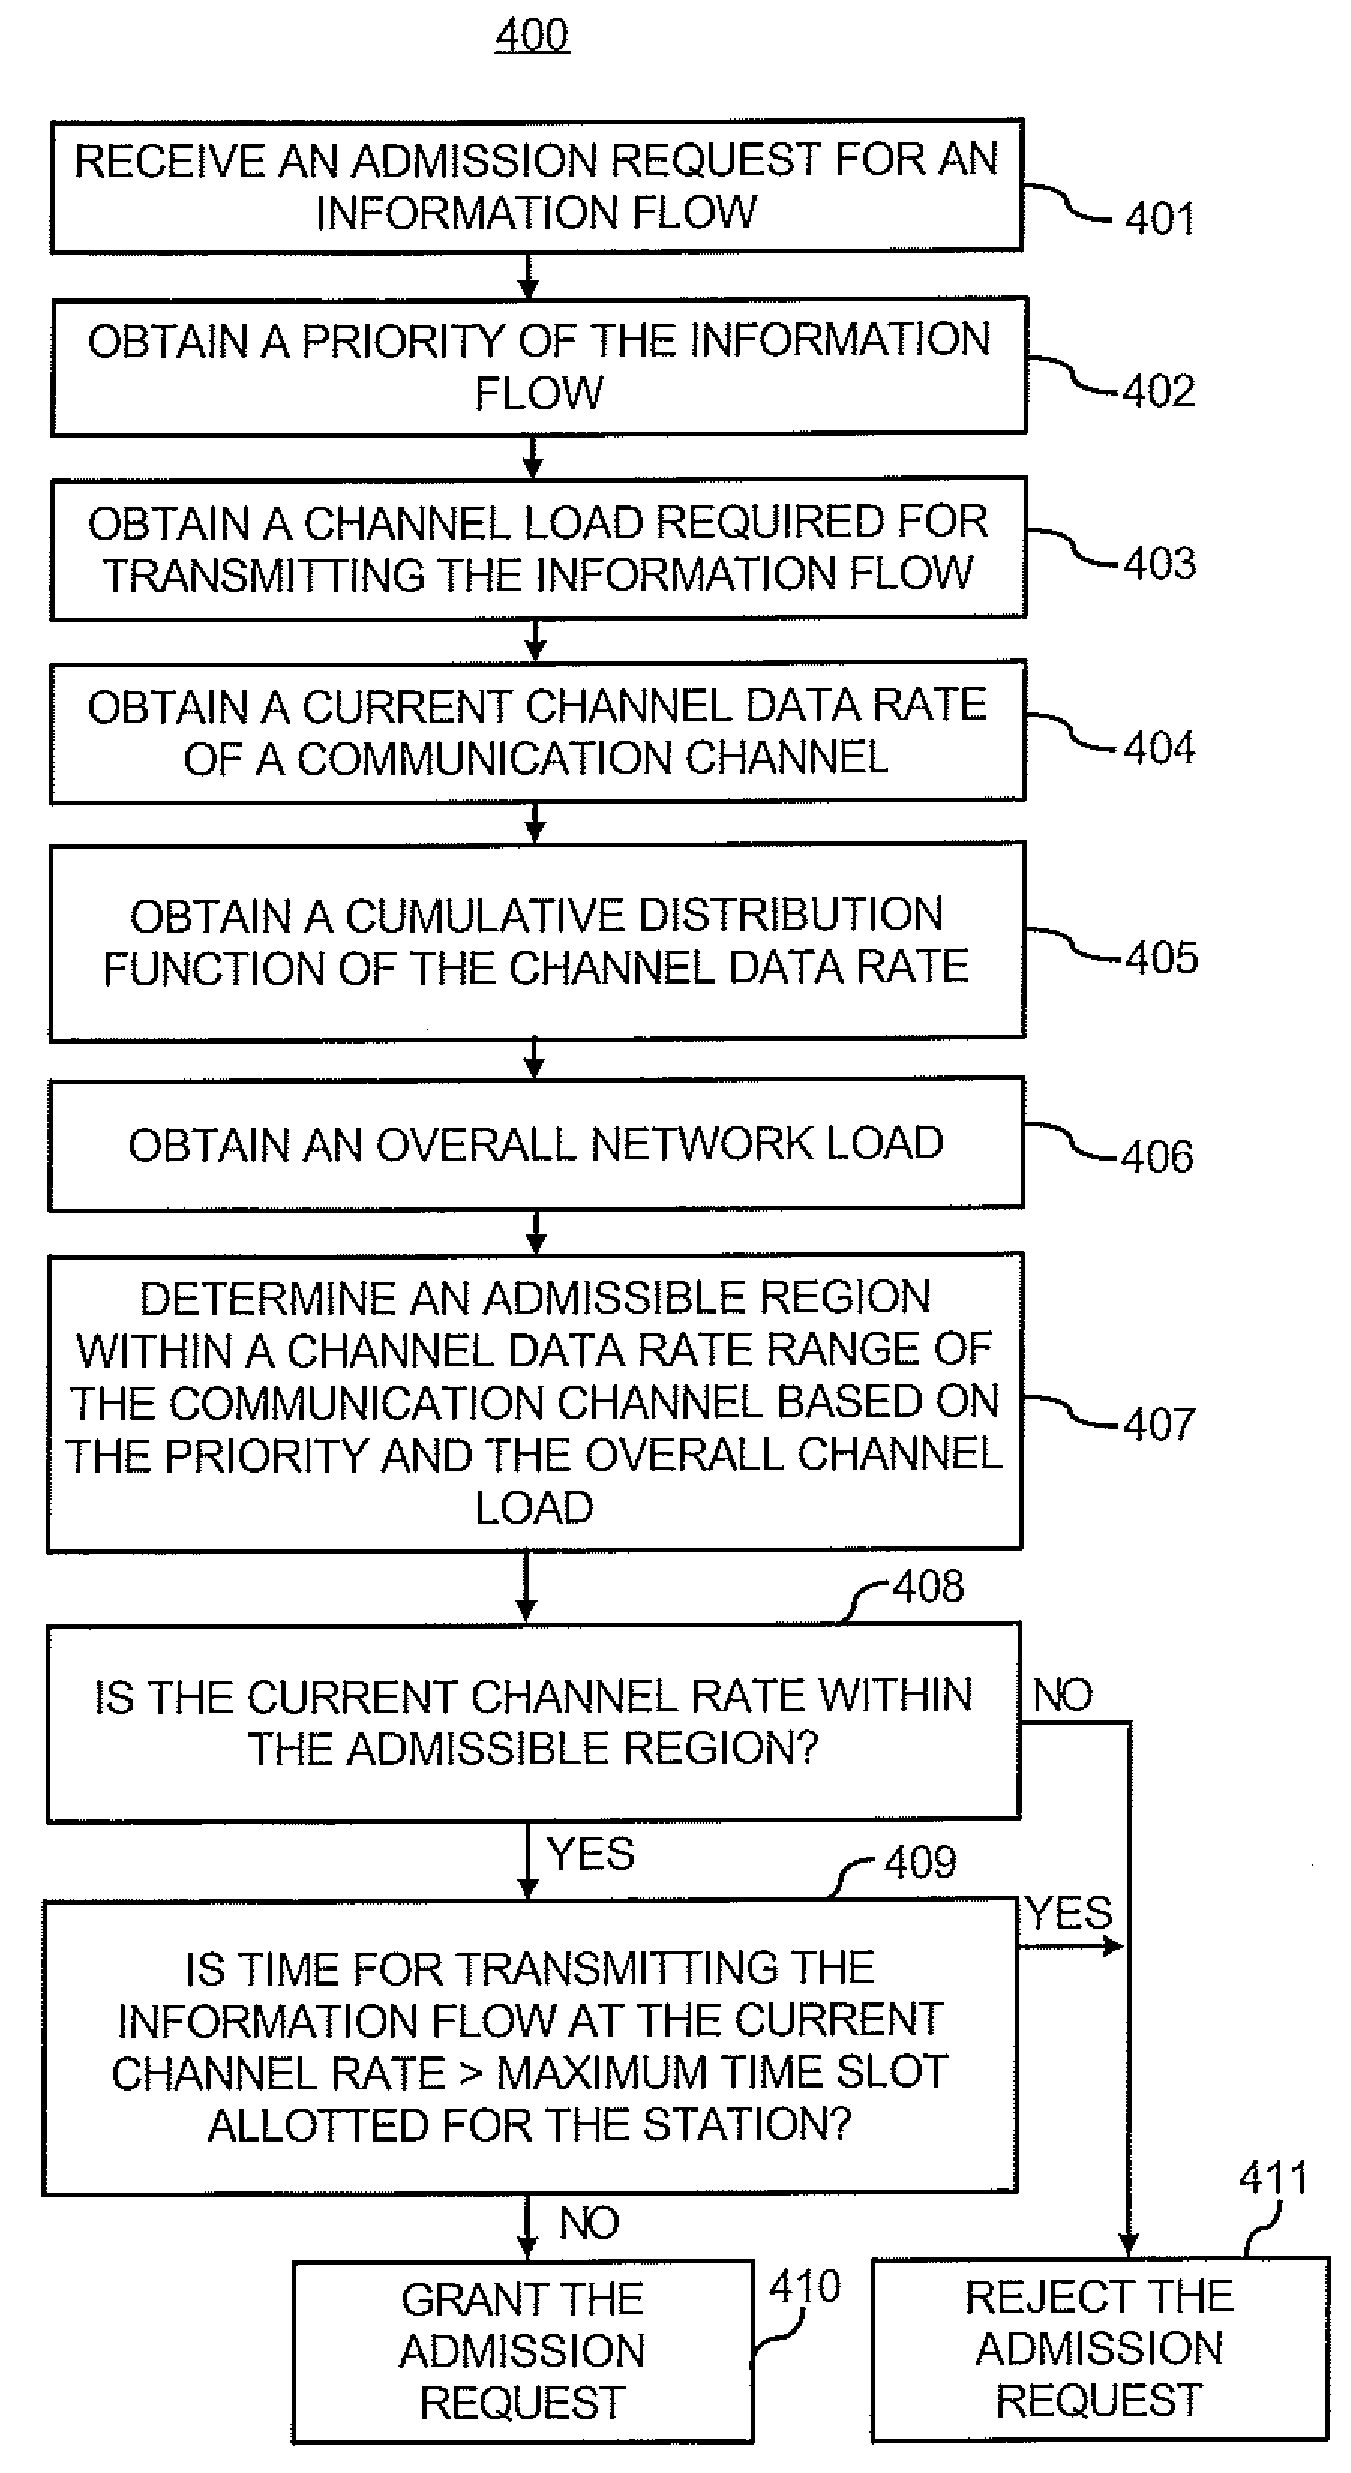 Priority-based admission control in a network with variable channel data rates